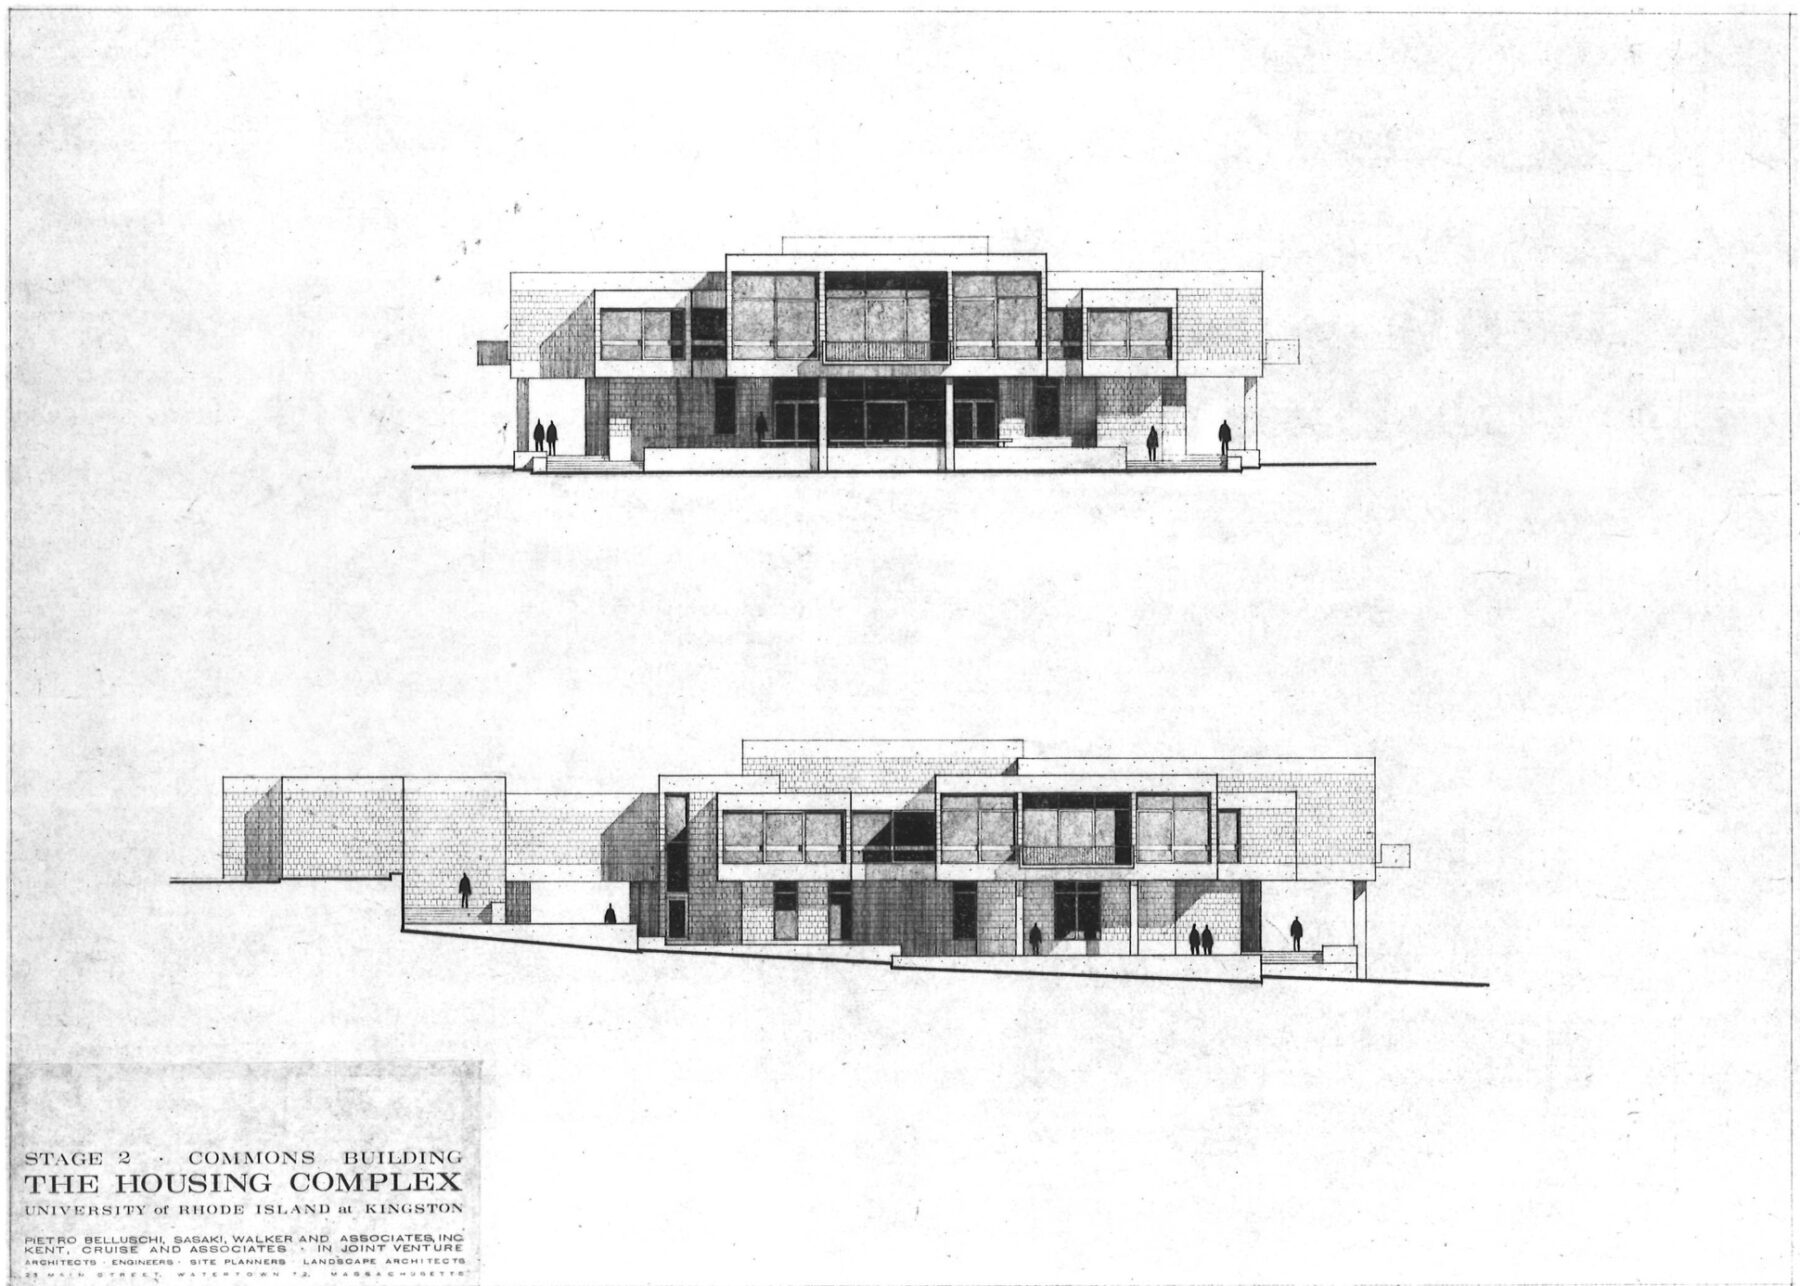 front and side elevation drawings of a 1960s brick dormitory